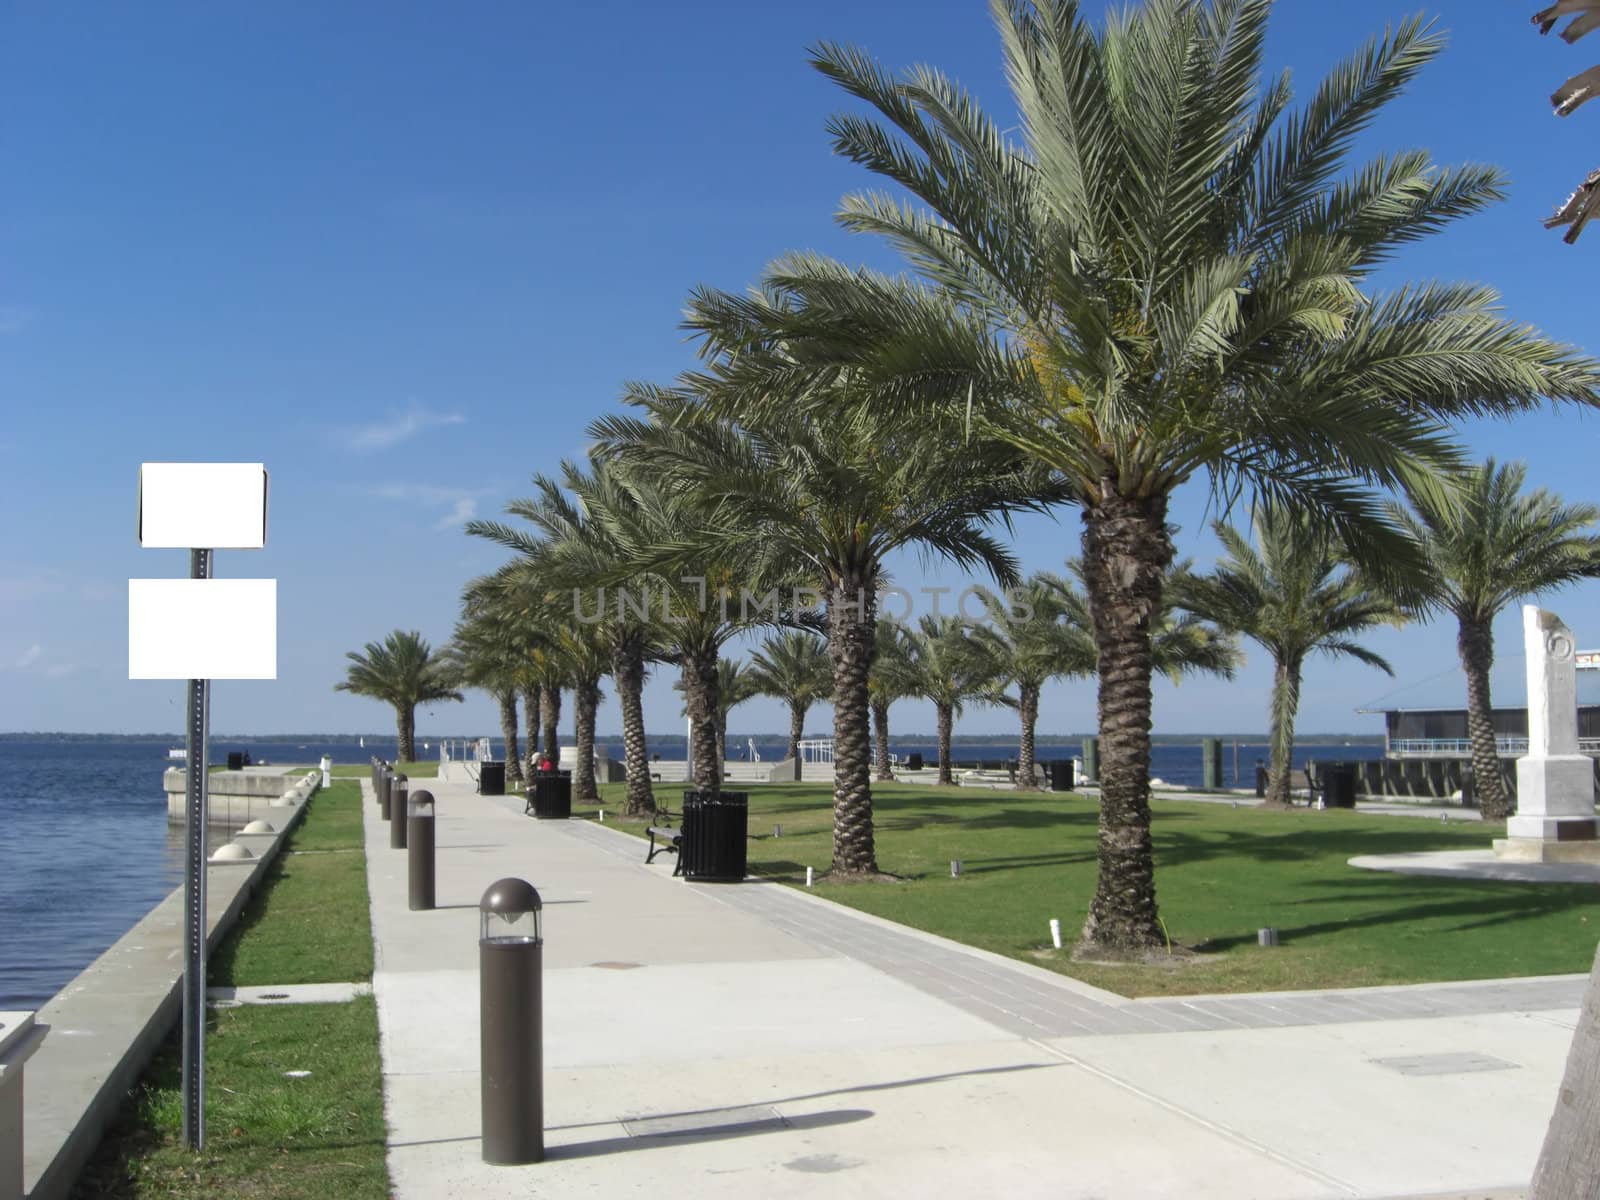 A public park that faces the ocean has palm trees, a wellkept lawn and benches.